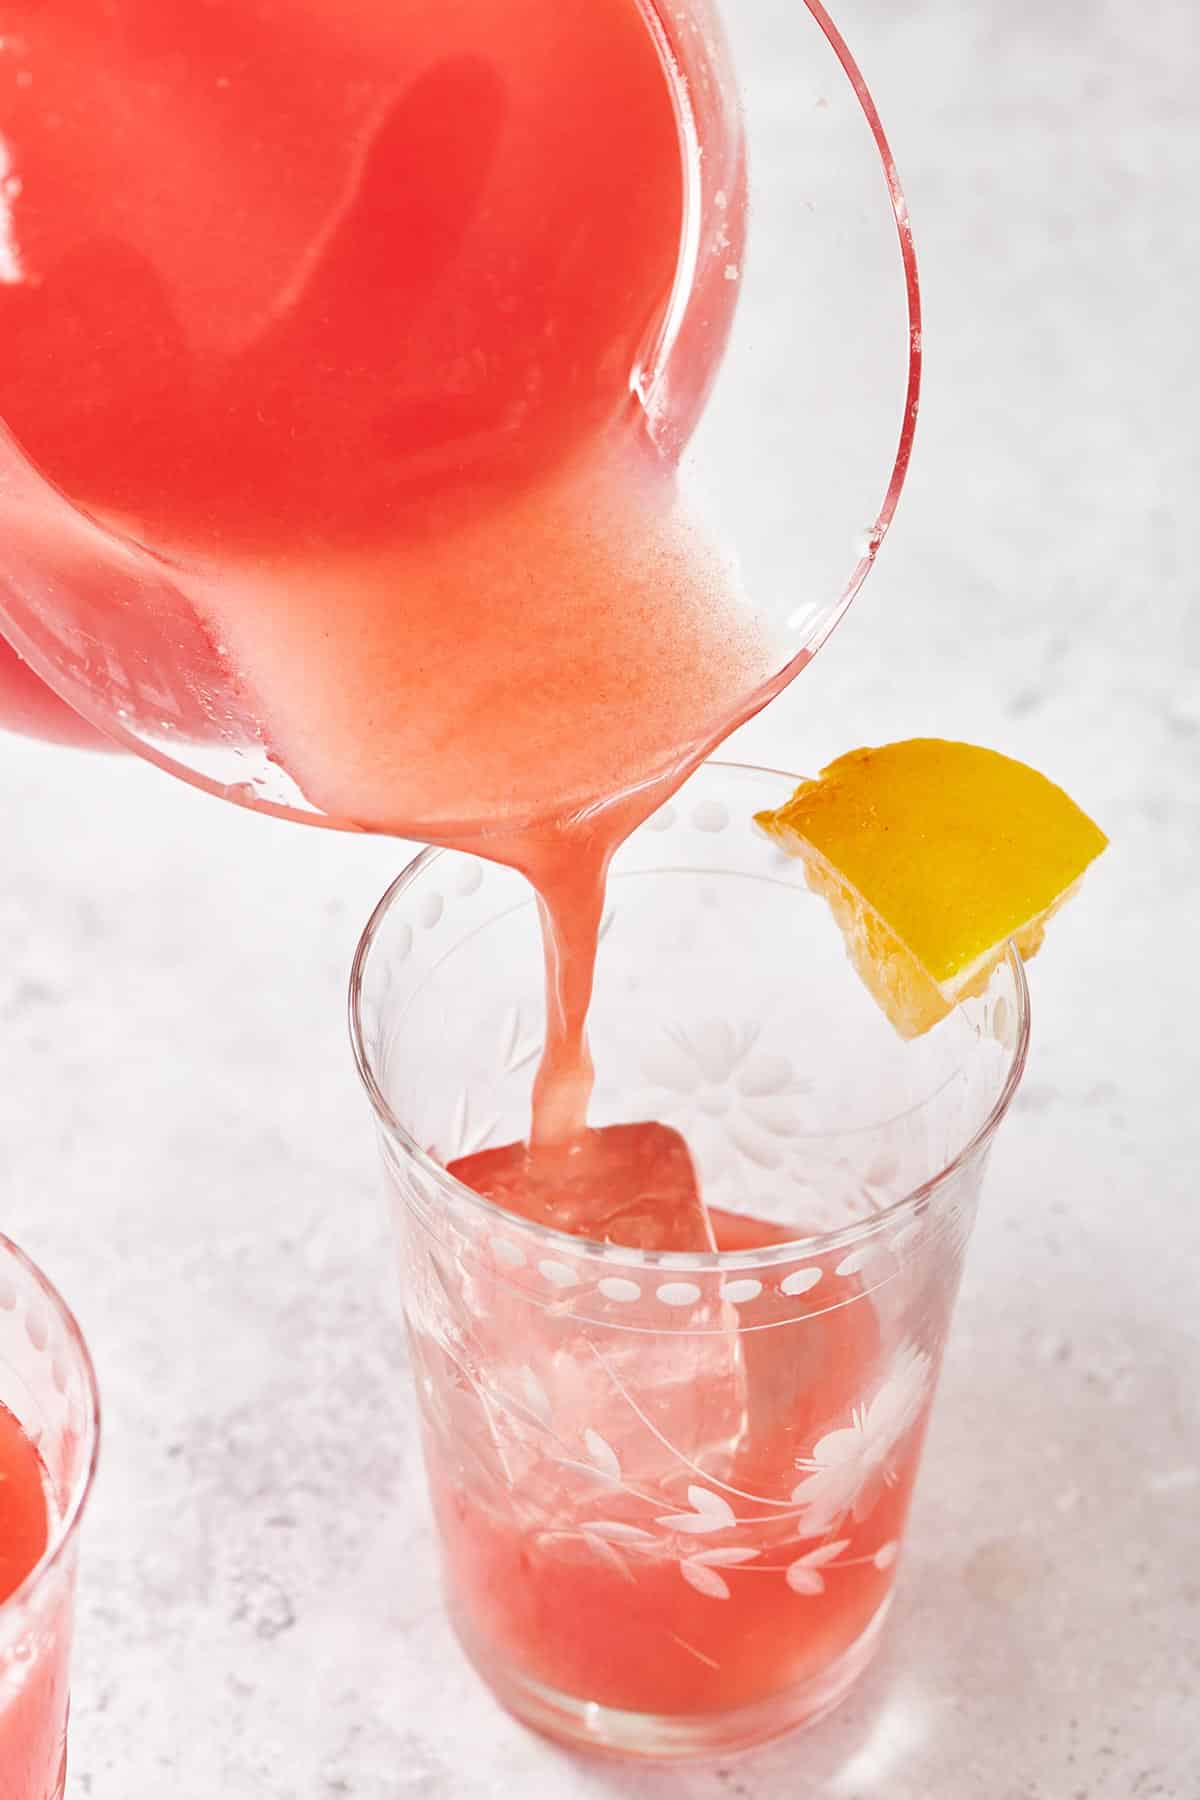 Pouring watermelon lemonade into ice-filled glass with lemon wedge.